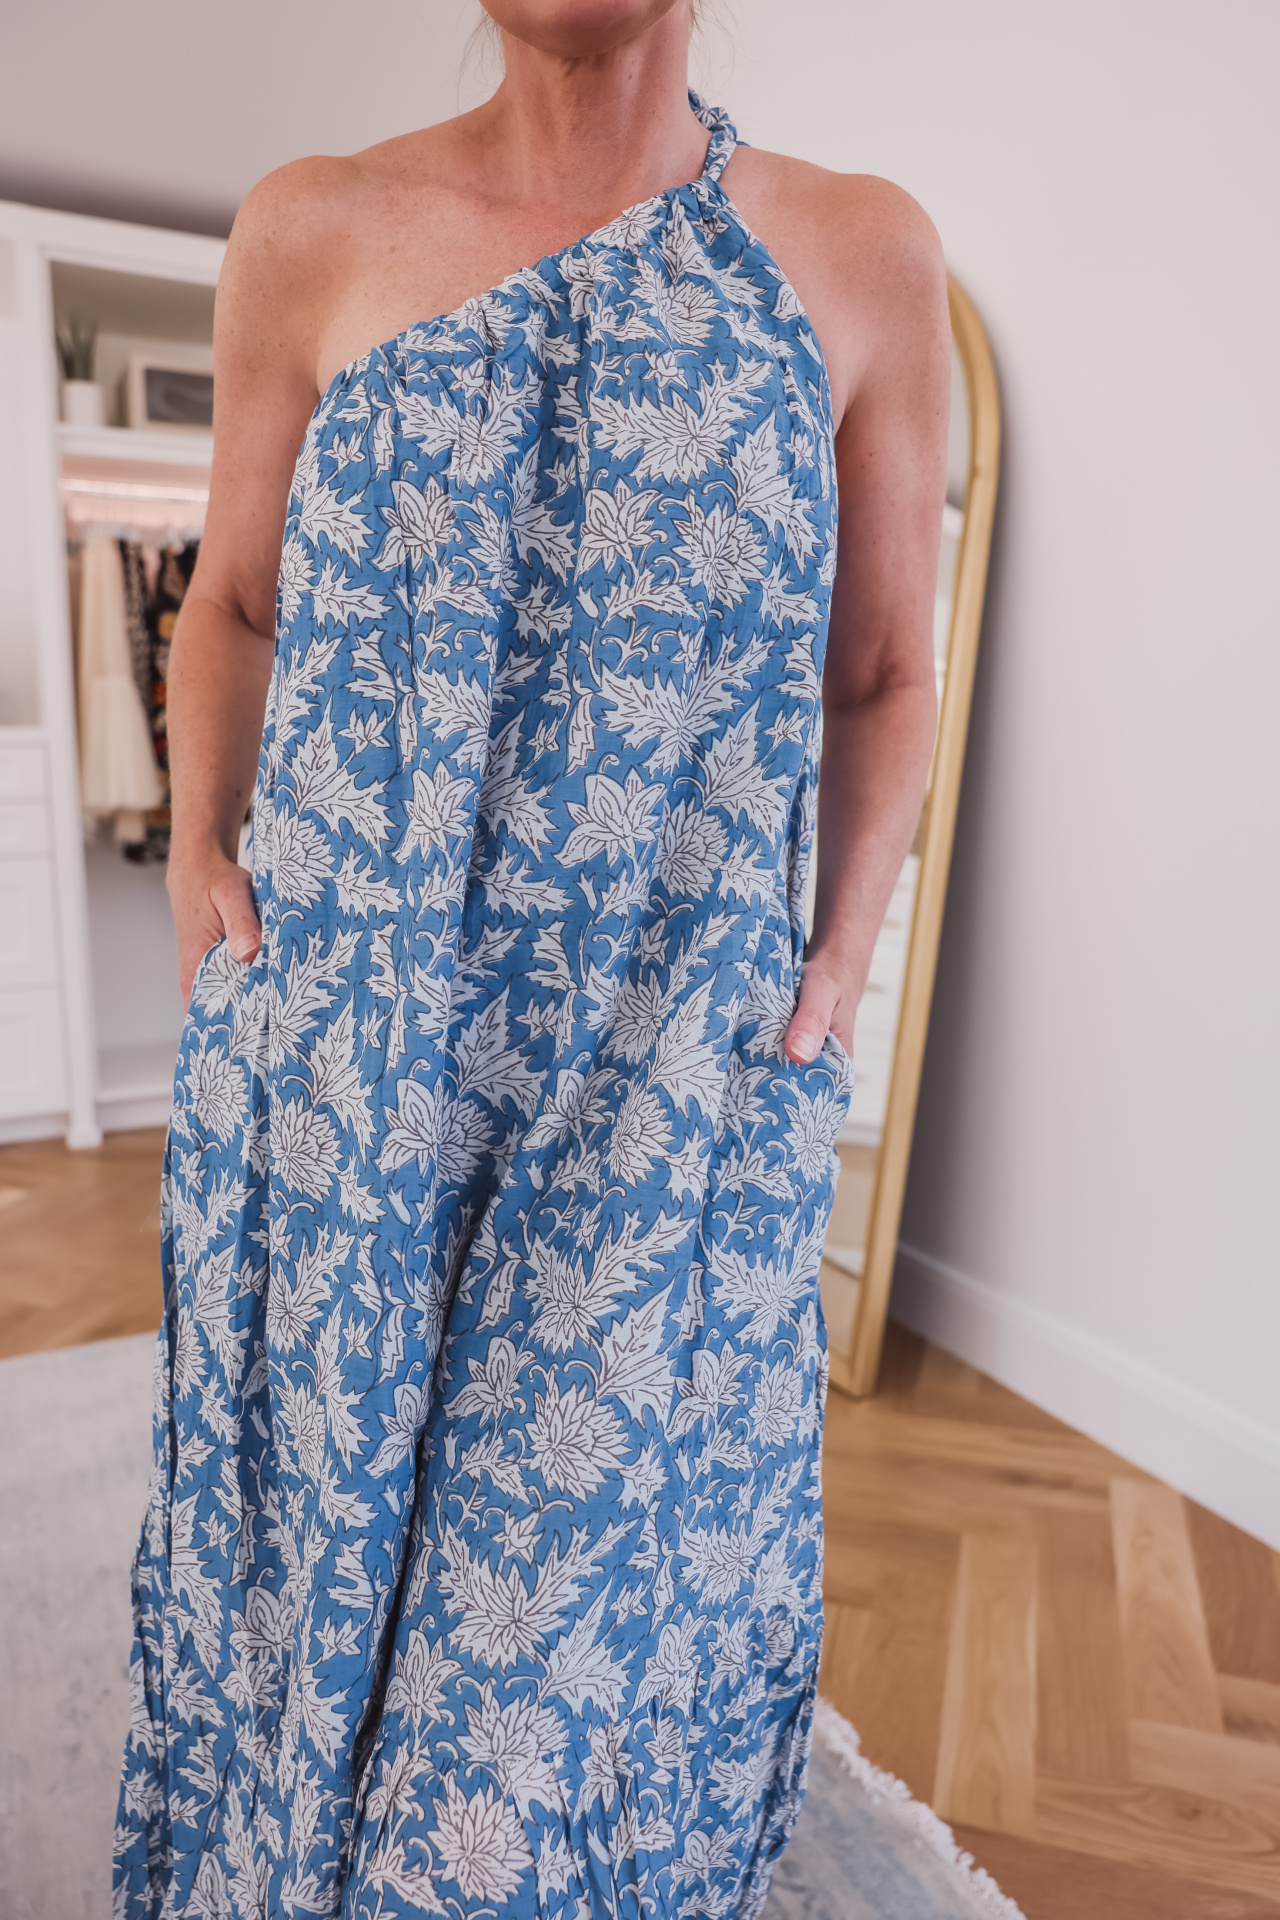 easy summer outfits for busy moms, easy summer outfits, summer mom outfits 2022, summer mom outfits, casual summer outfit ideas, cute mom outfits for summer, easy mom outfits, mom outfit ideas, casual mom outfits summer, summer outfit 2022, casual summer outfits for over 40, casual summer outfits for over 30, blue printed maxi dress by velvet, marc fisher mesh strappy heels, le specs sunglasses, erin busbee, busbee style, fashion over 40, telluride, colorado